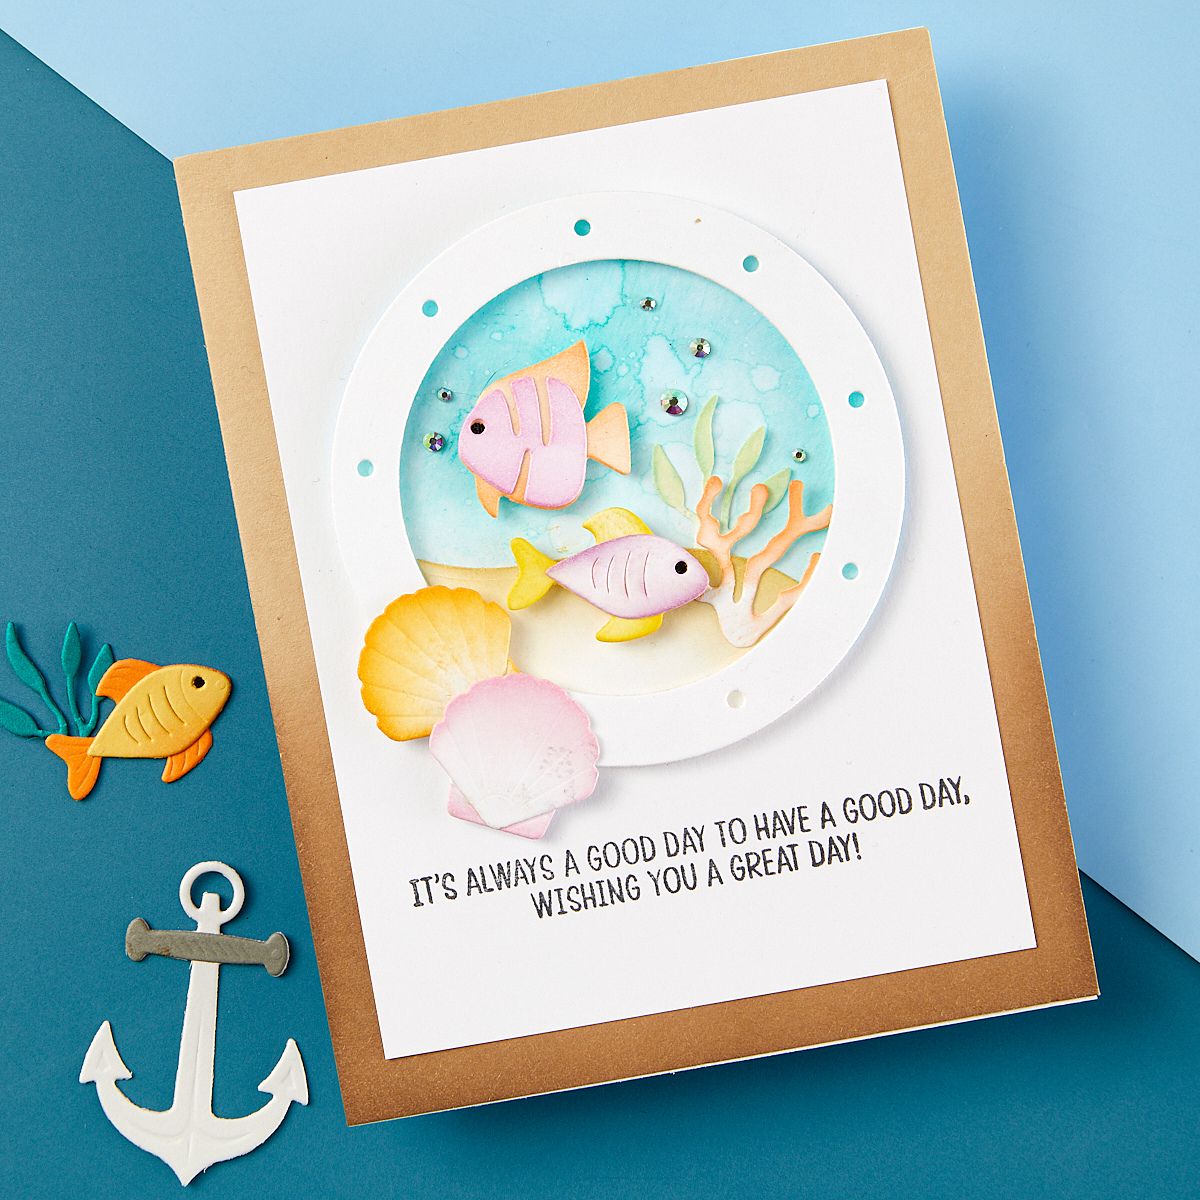 Spellbinders - Coastal Escape View Etched Dies from the Windows with a View Collection by Tina Smith